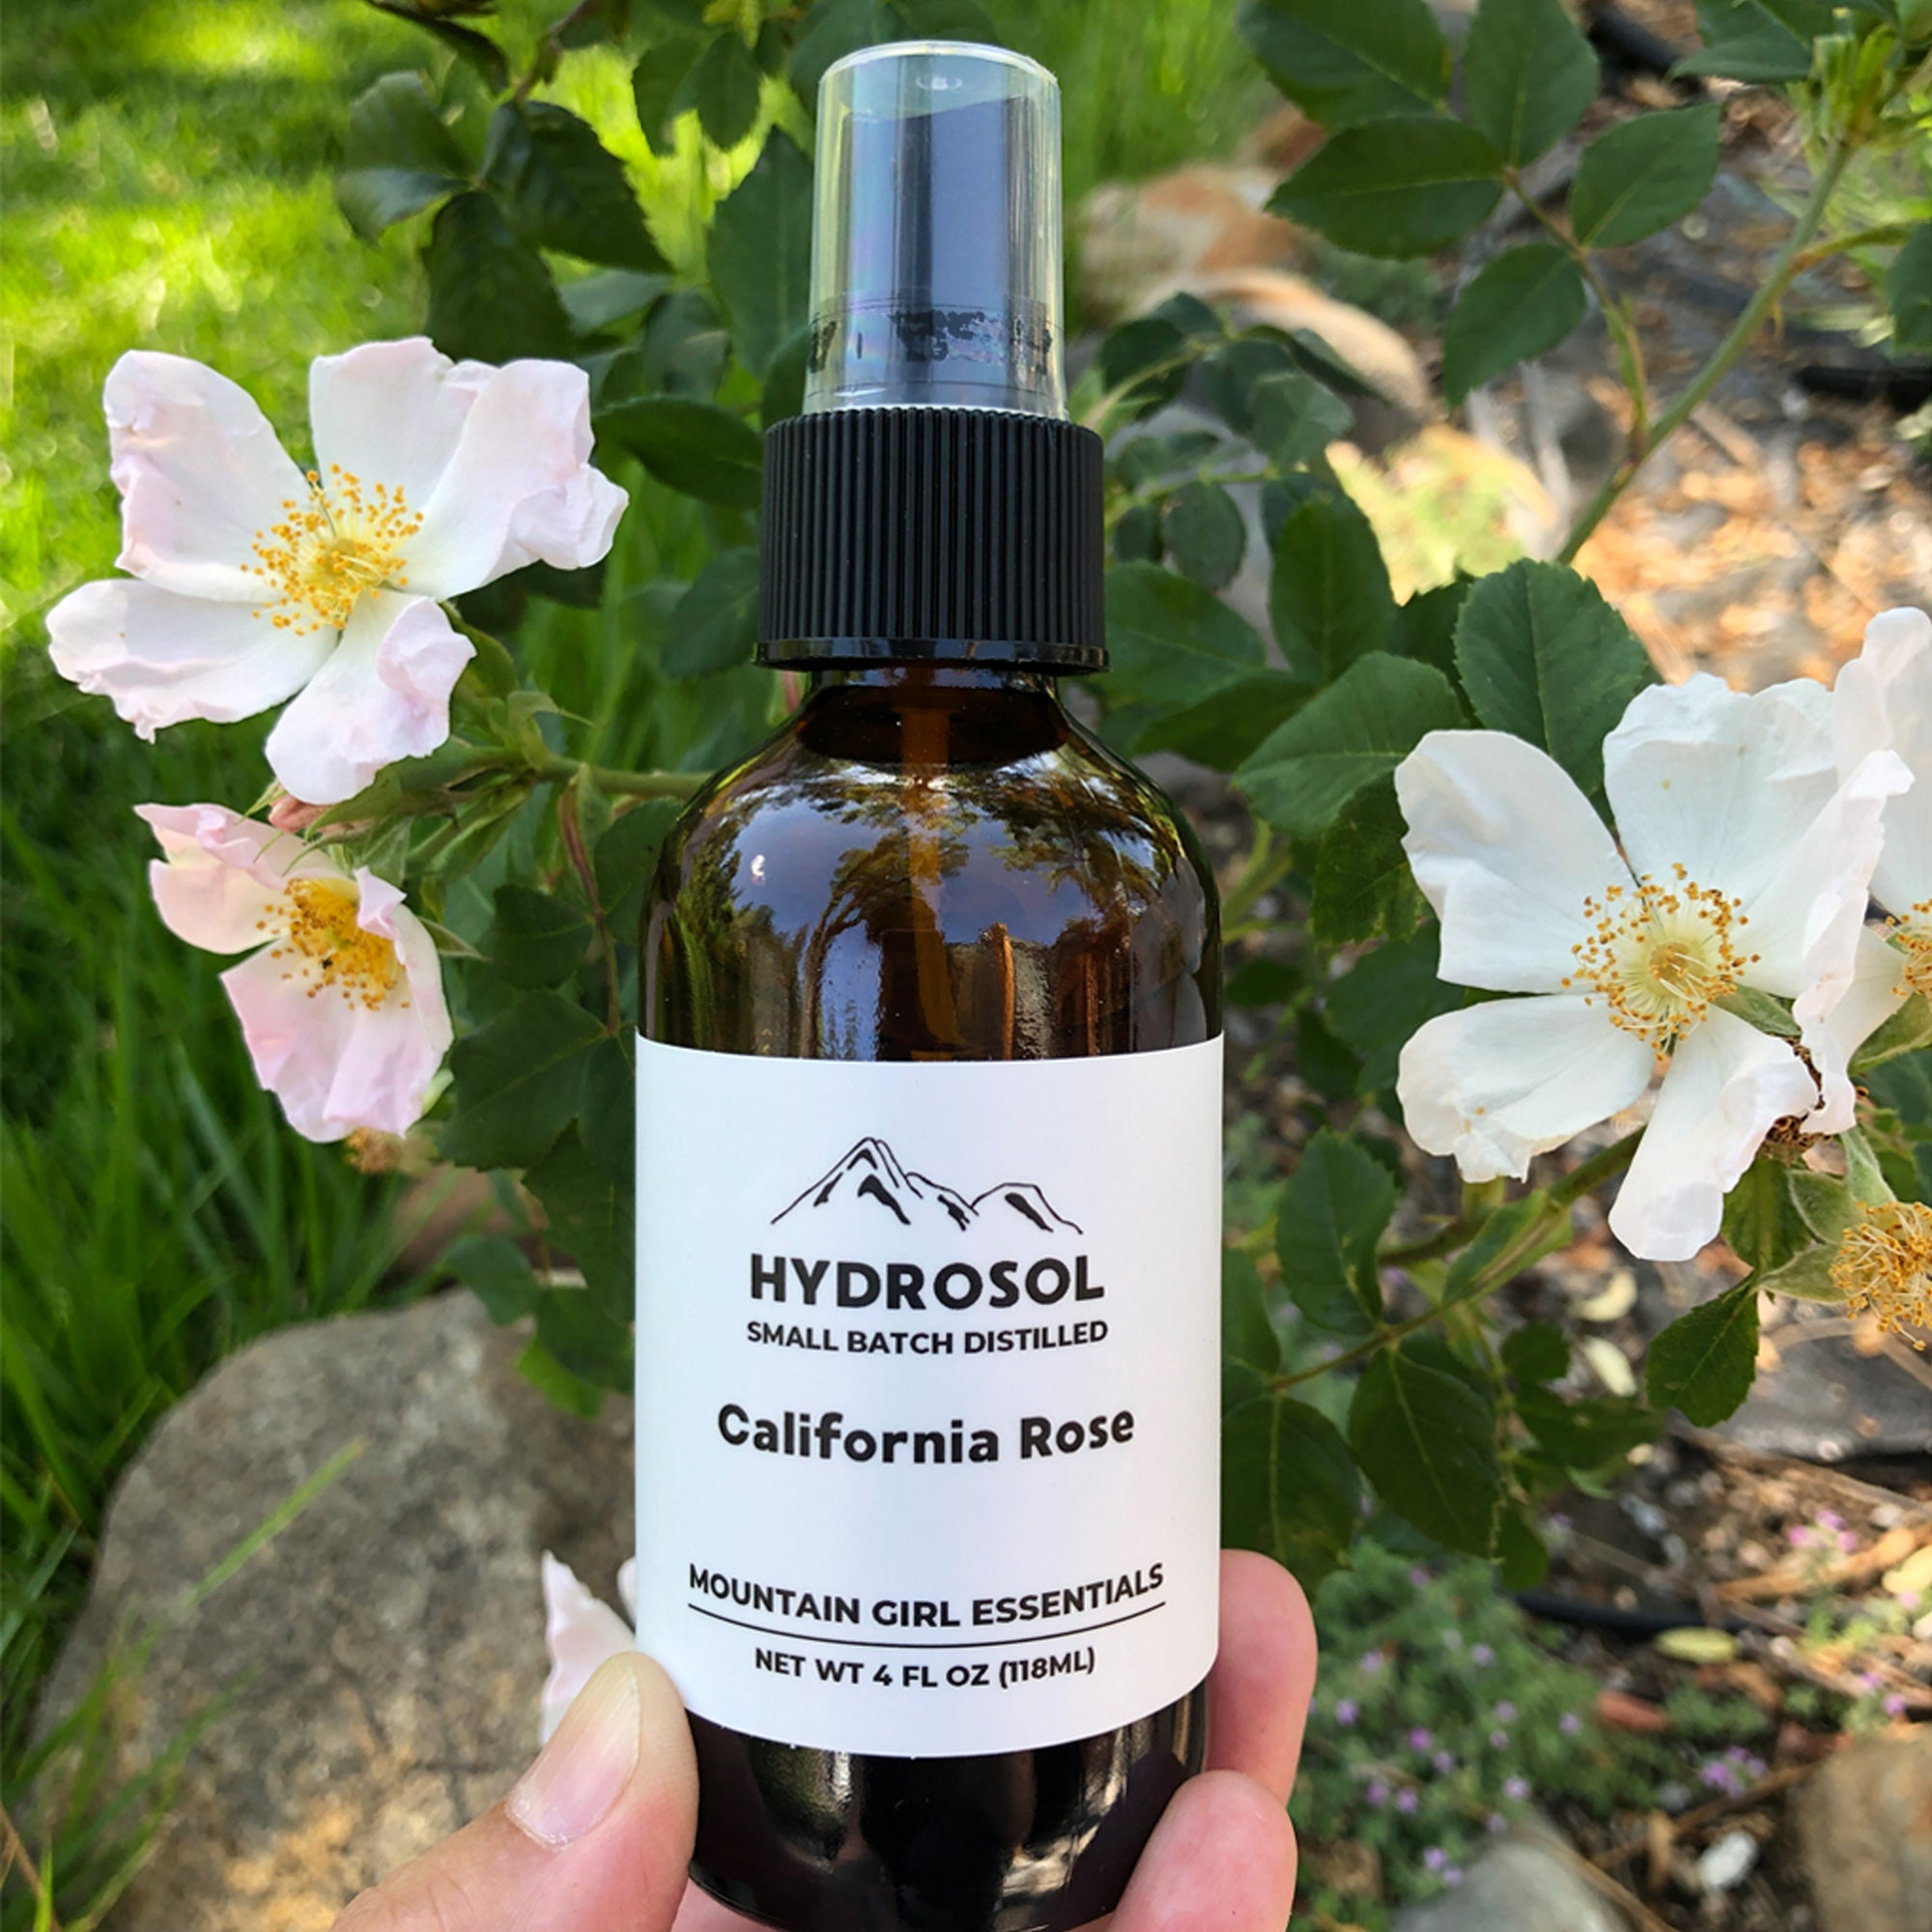 What Are Essential Oils and Hydrosols?